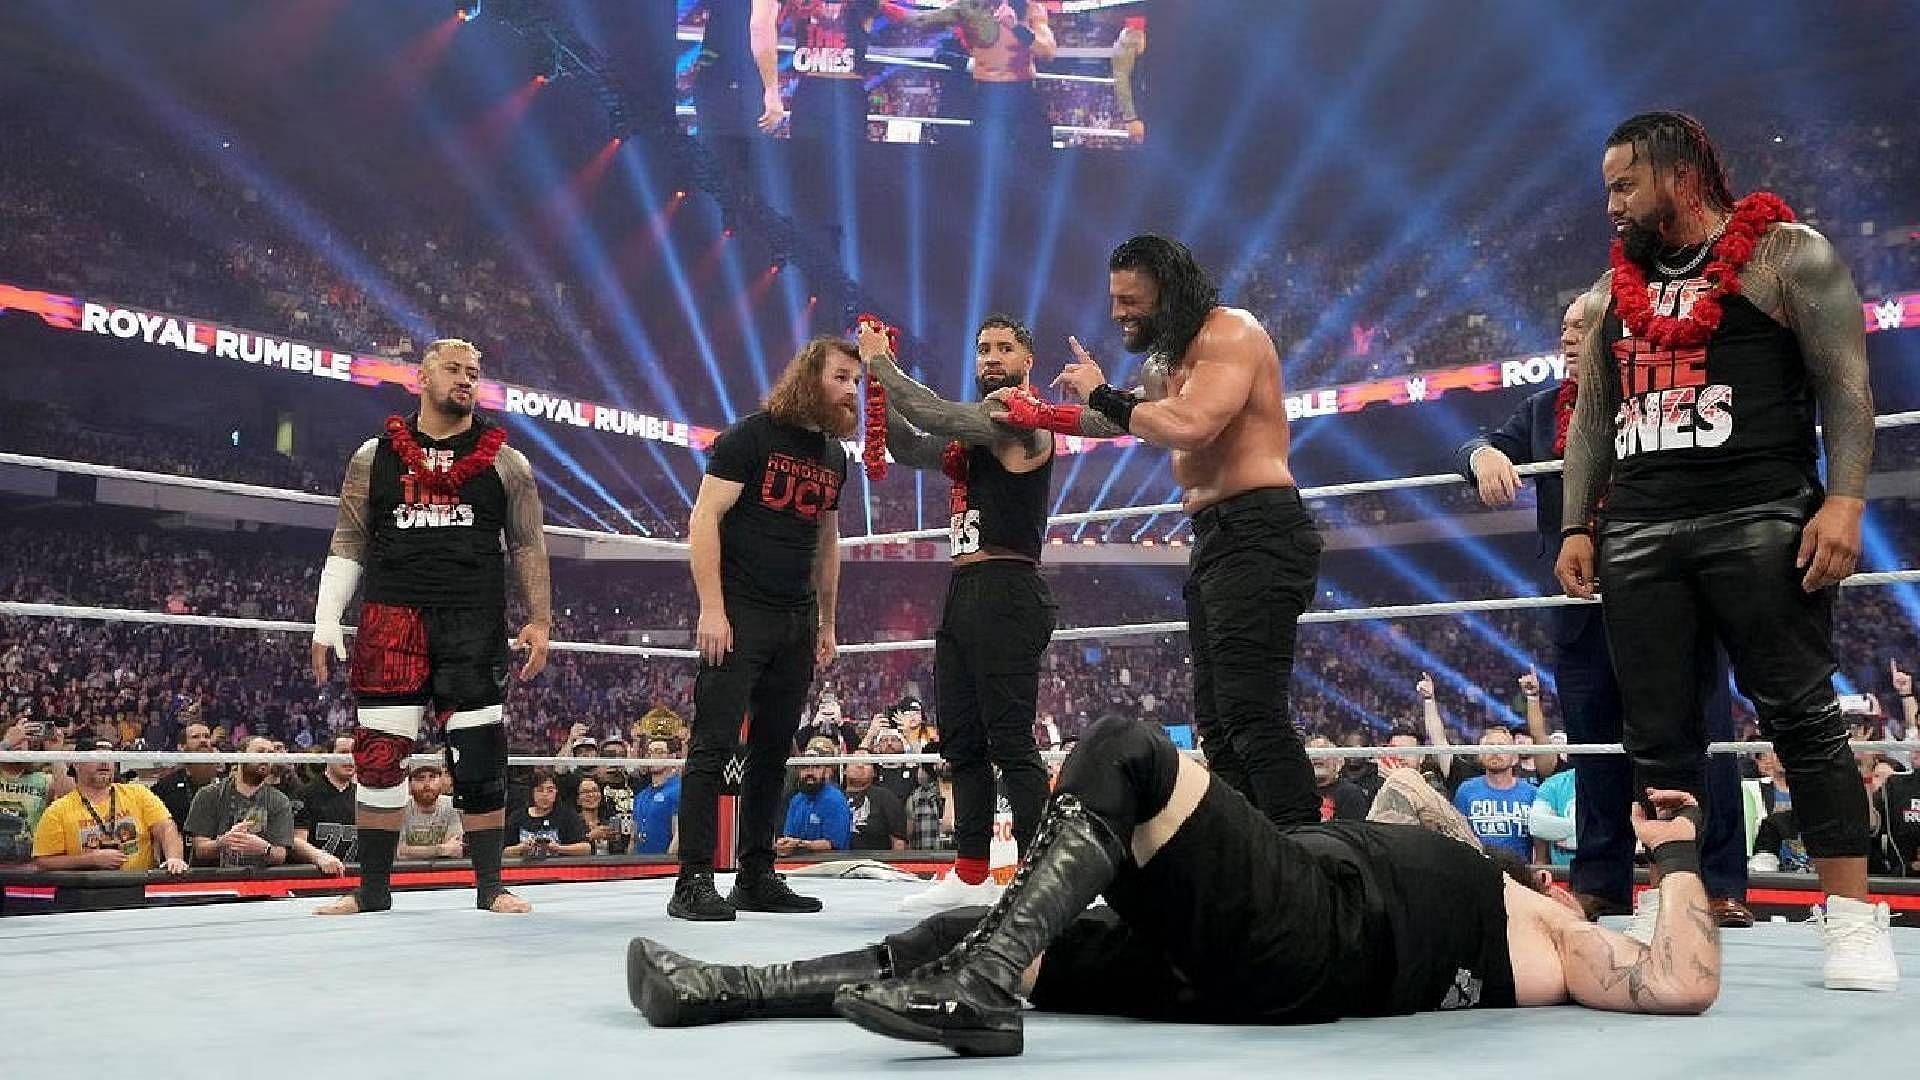 Backstage reaction to The Bloodline angle at the Royal Rumble revealed – Reports